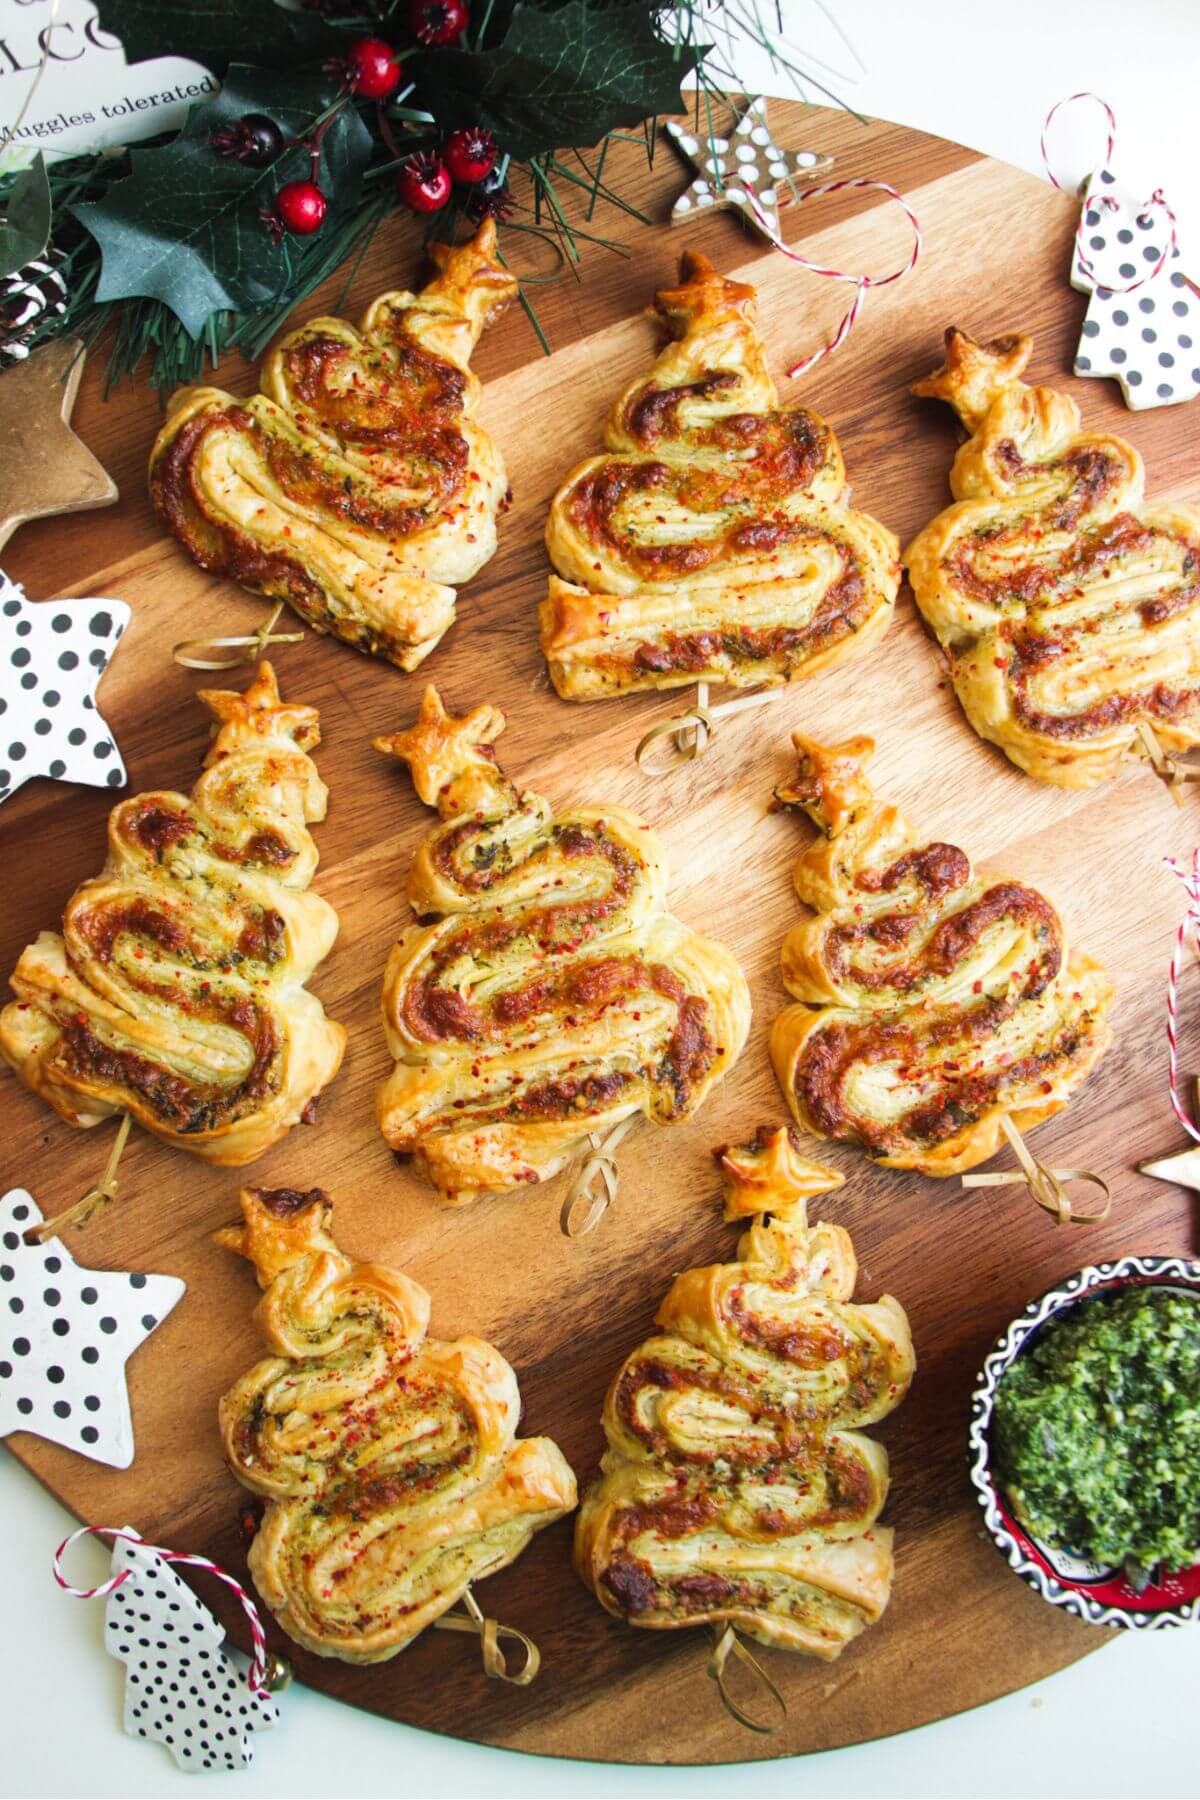 Pesto puff pastry Christmas trees on a wooden board.